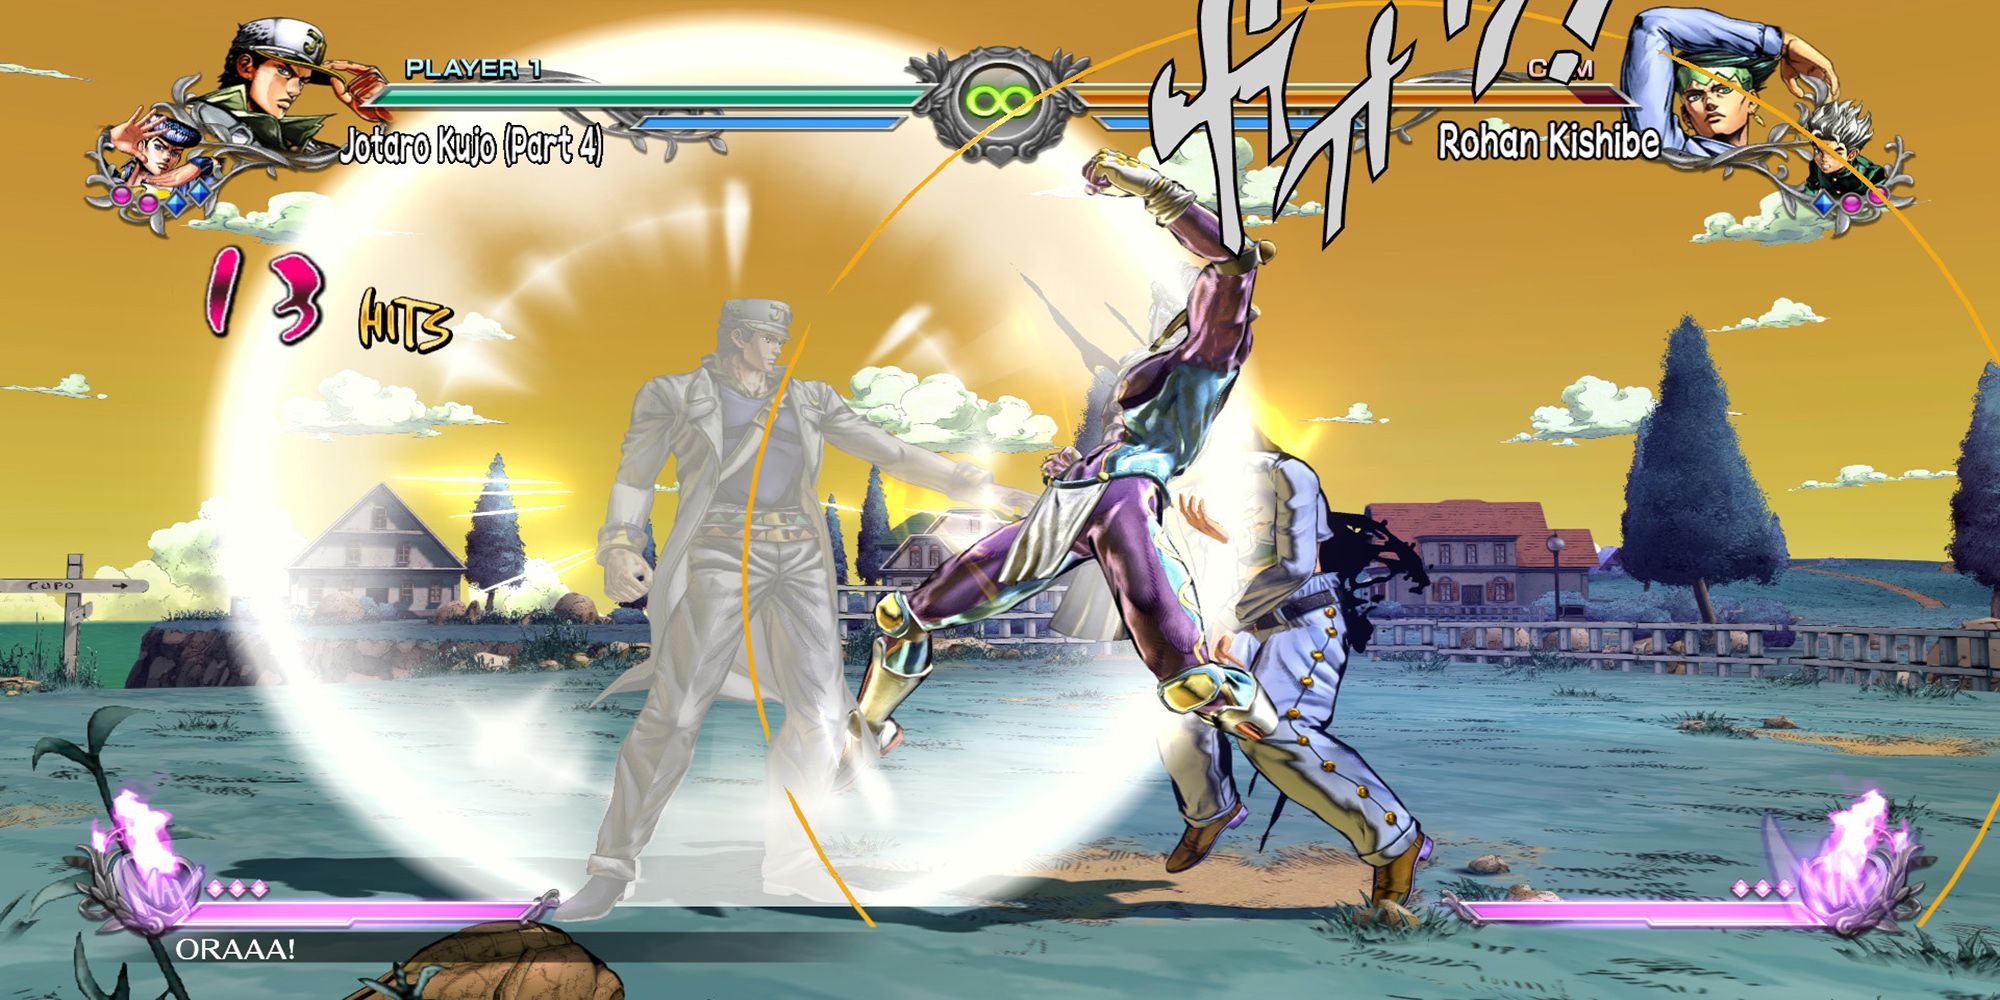 Jotaro Kujo uses Stand Rush to distance himself from Rohan Kishibe during a battle at Cape Boingy-Boing in Jojo's Bizarre Adventure ASBR.